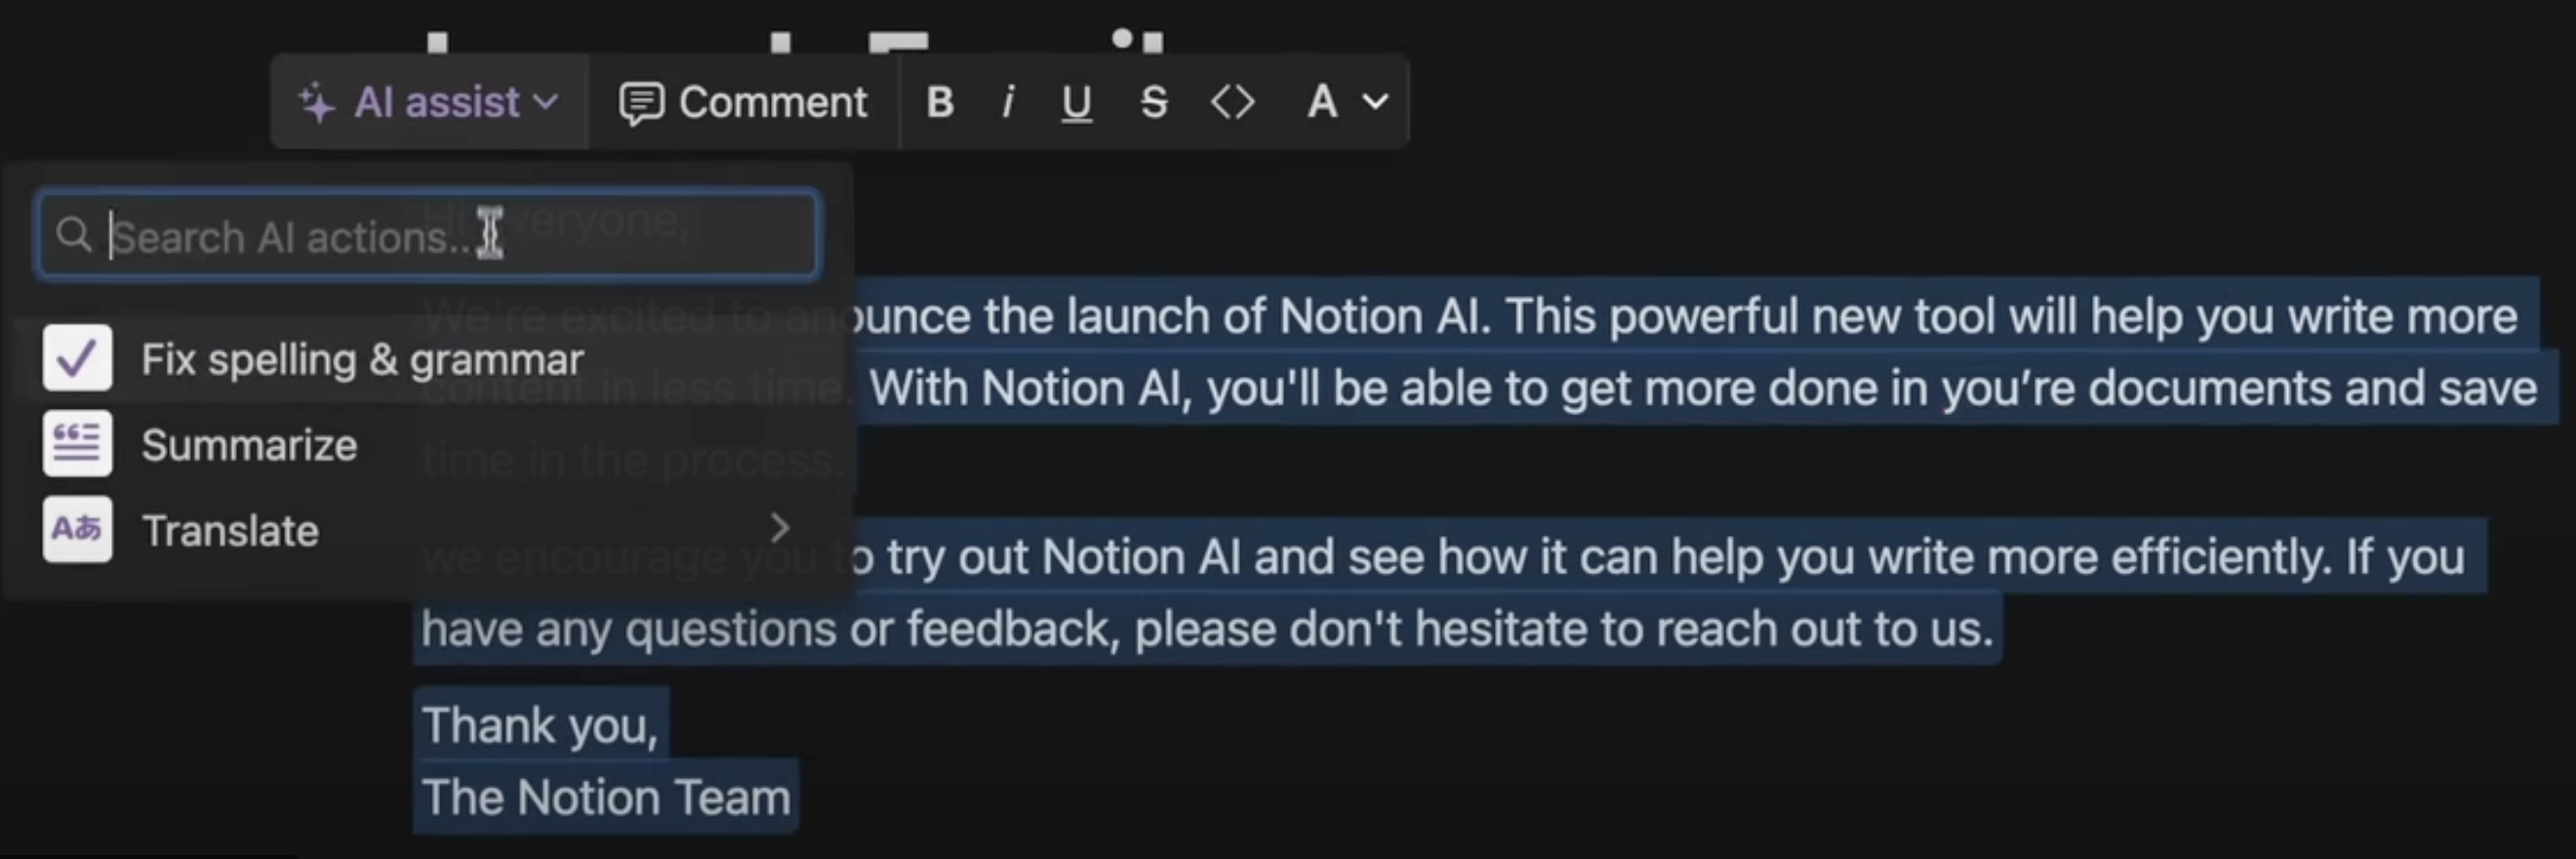 Using Notion AI in the Notion app